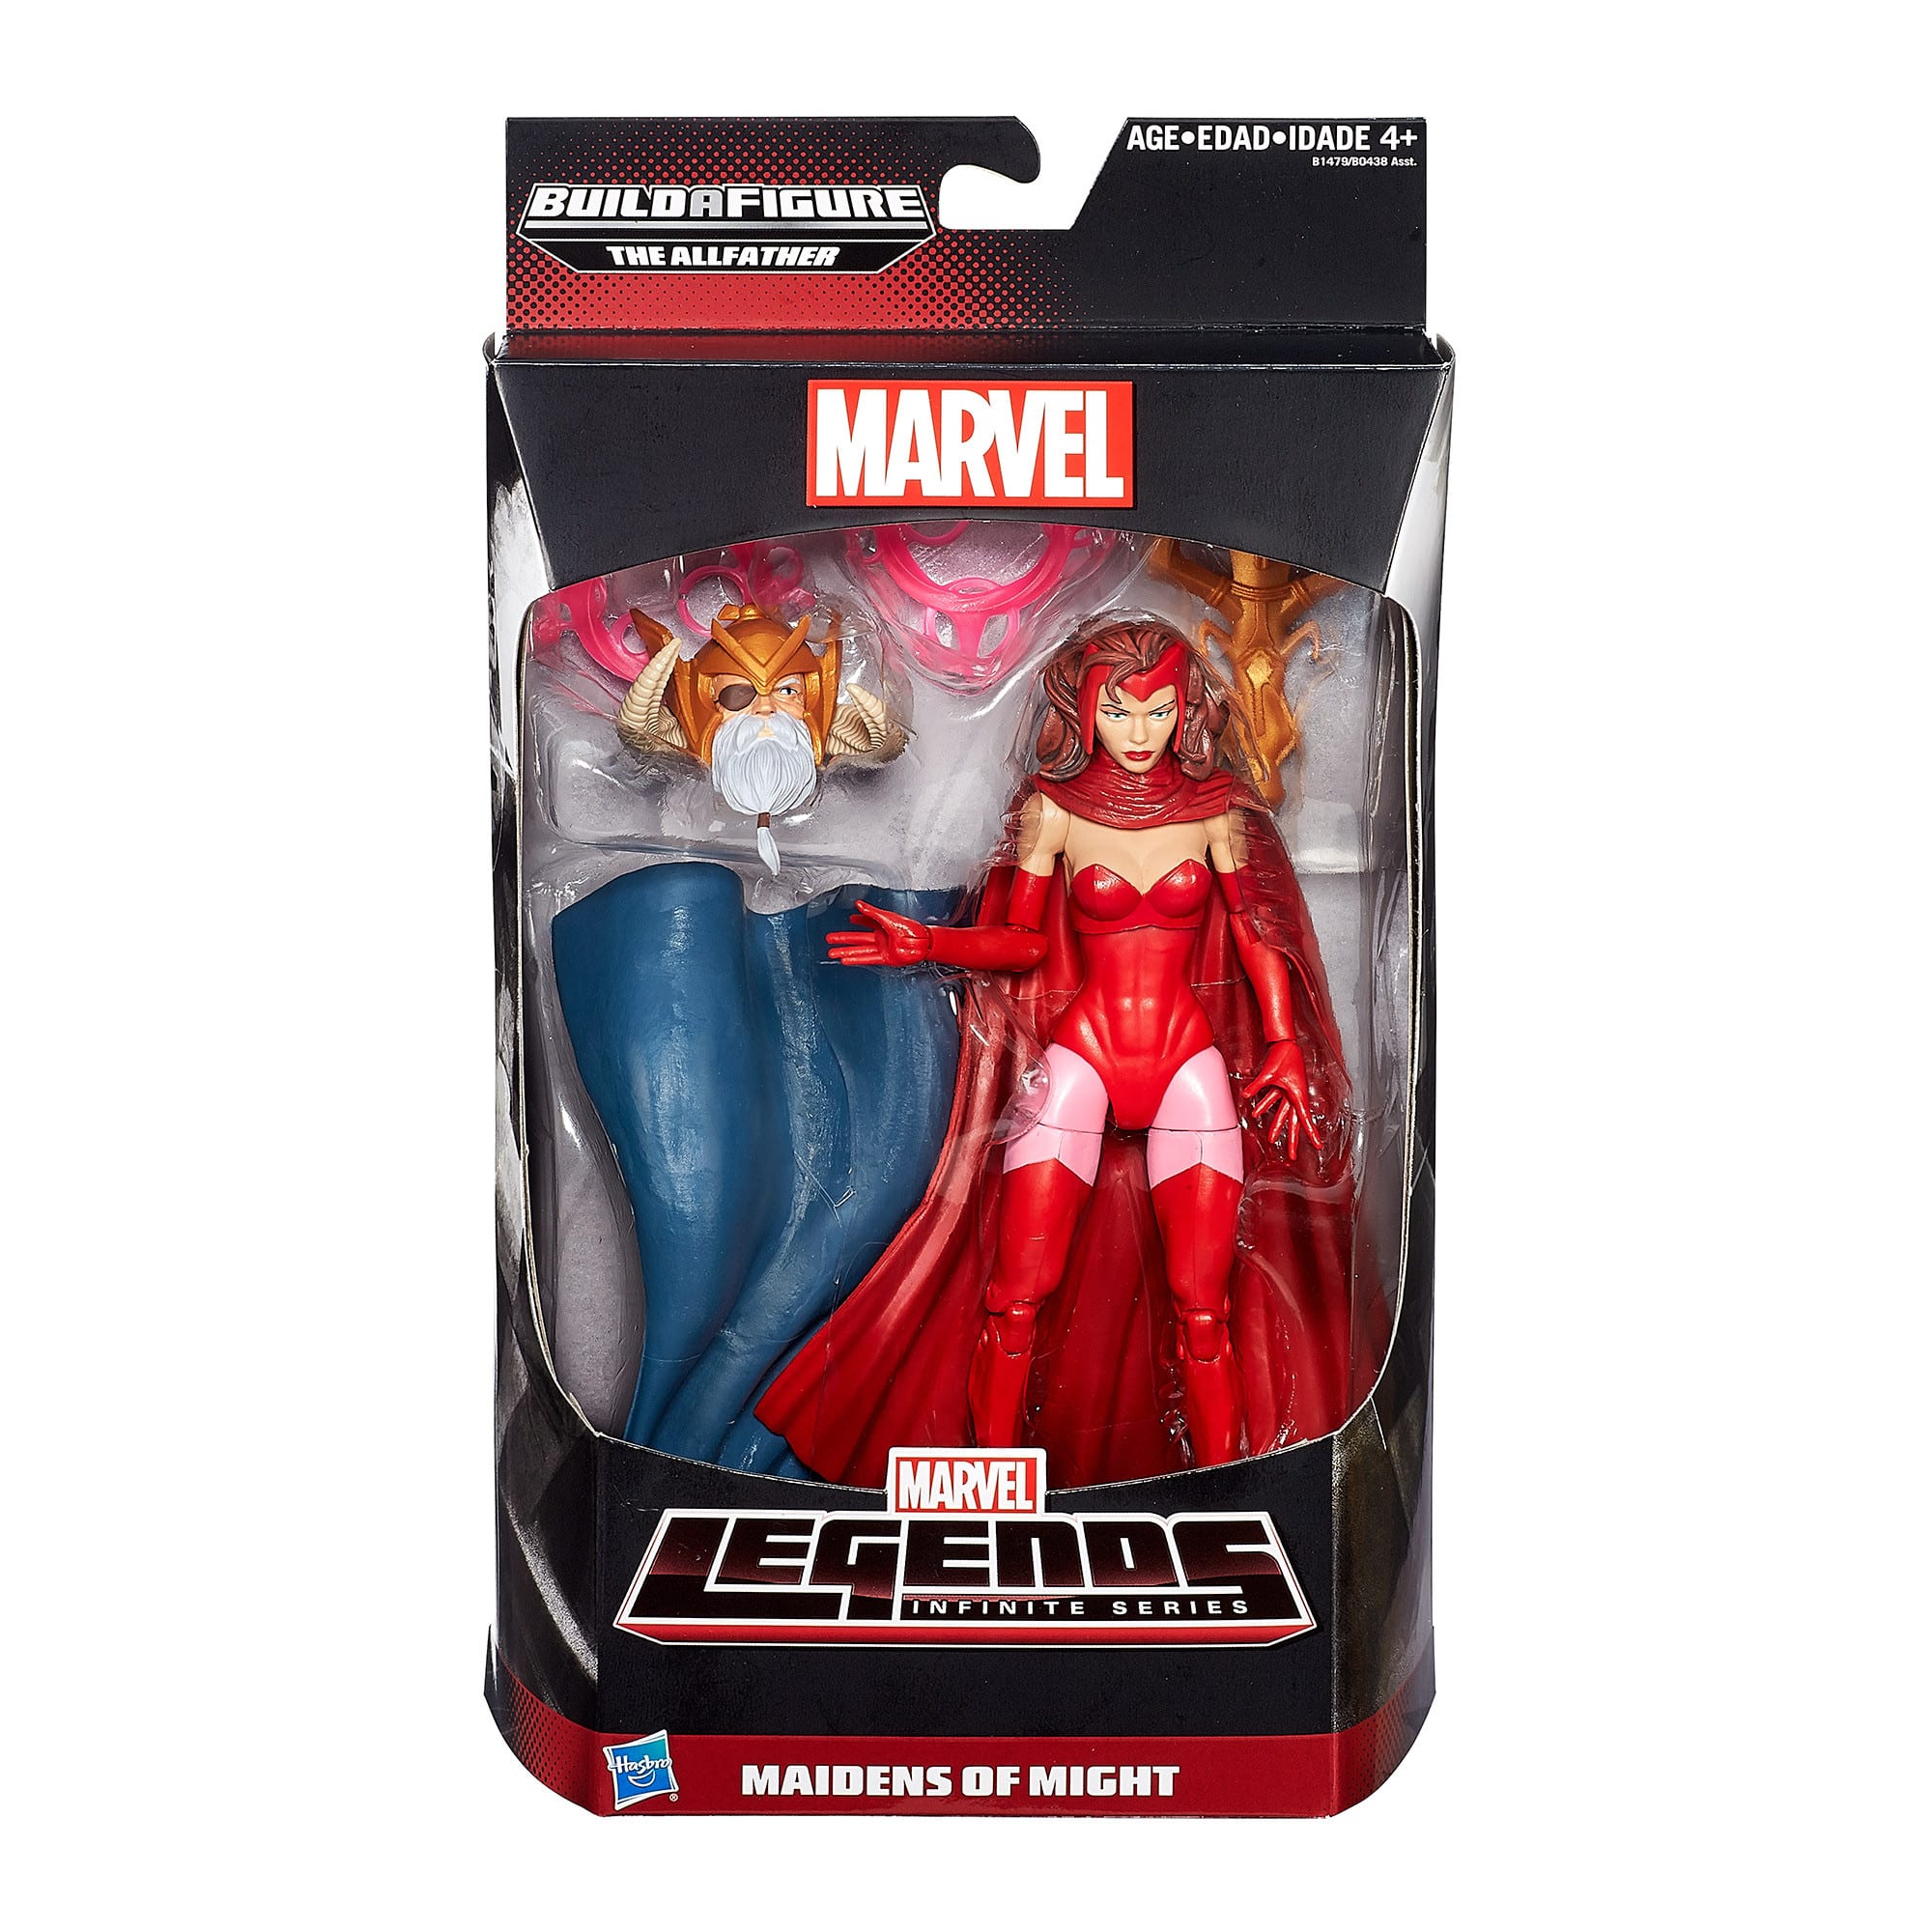 Marvel Legends - Maidens of Might - Scarlet Witch